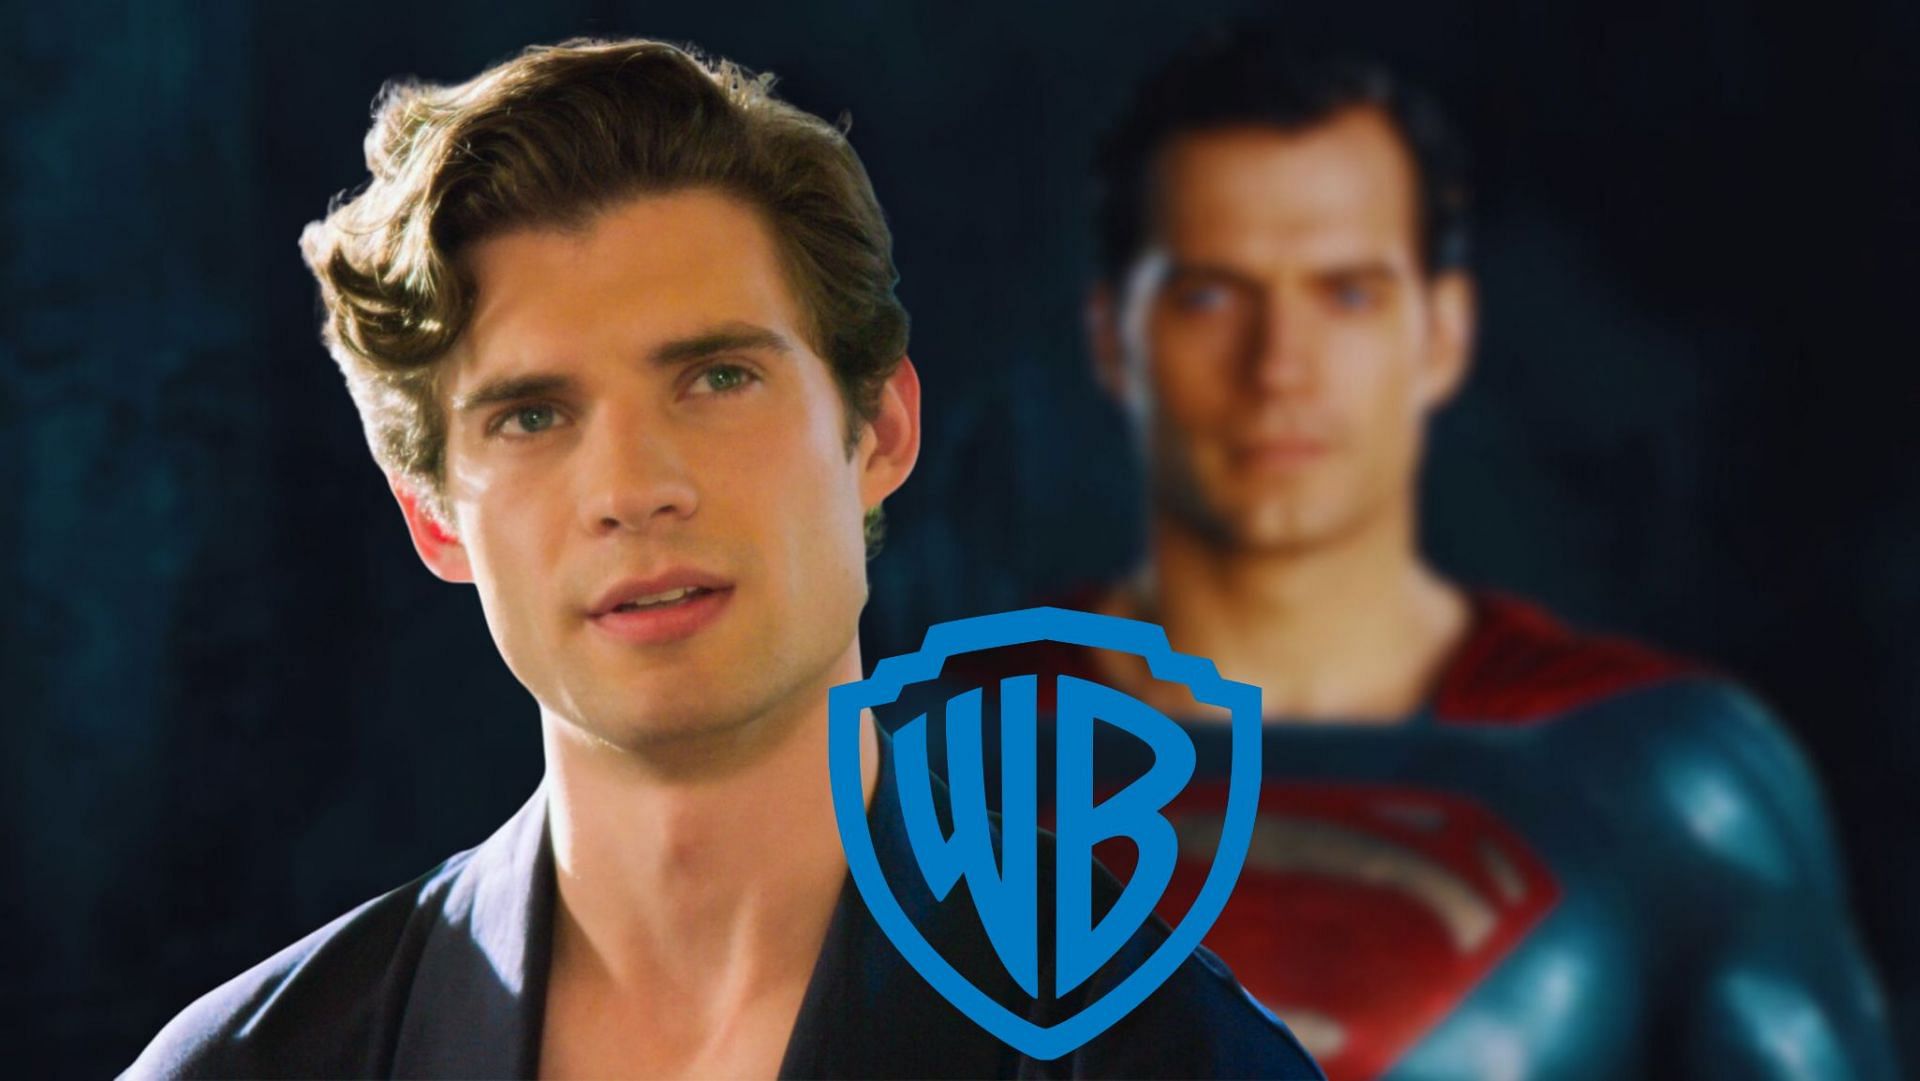 Warner Bros. enlists David Corenswet, the frontrunner for Superman, for an exciting role in Twisters (Image via Sportskeeda)